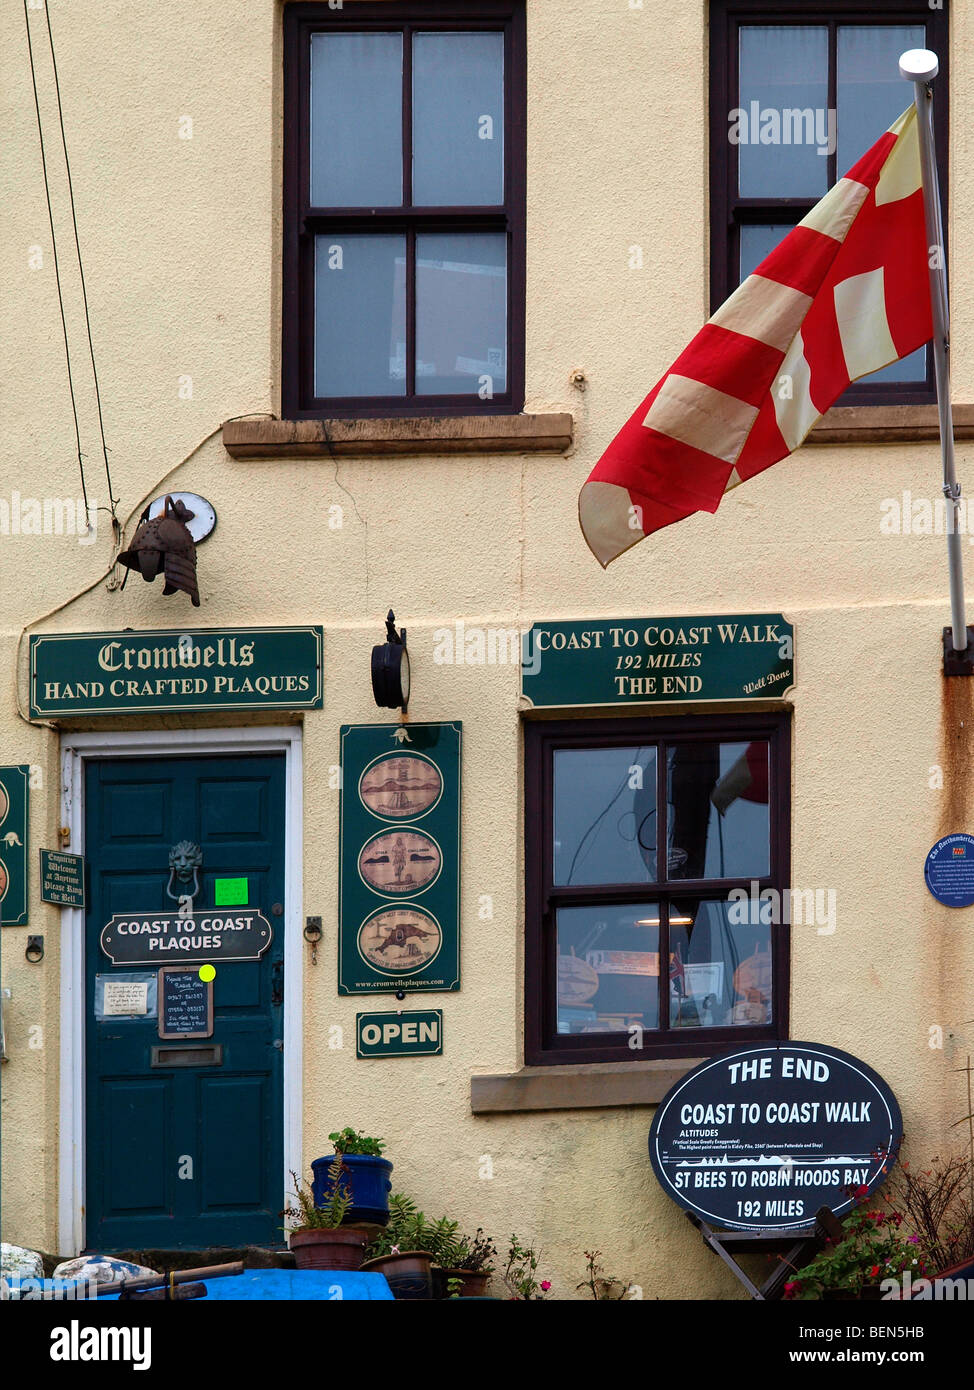 Cromwells shop Robin Hoods Bay selling plaques and other memorabilia relating to the 192 mile 'Coast to Coast' walk from St Bees Stock Photo